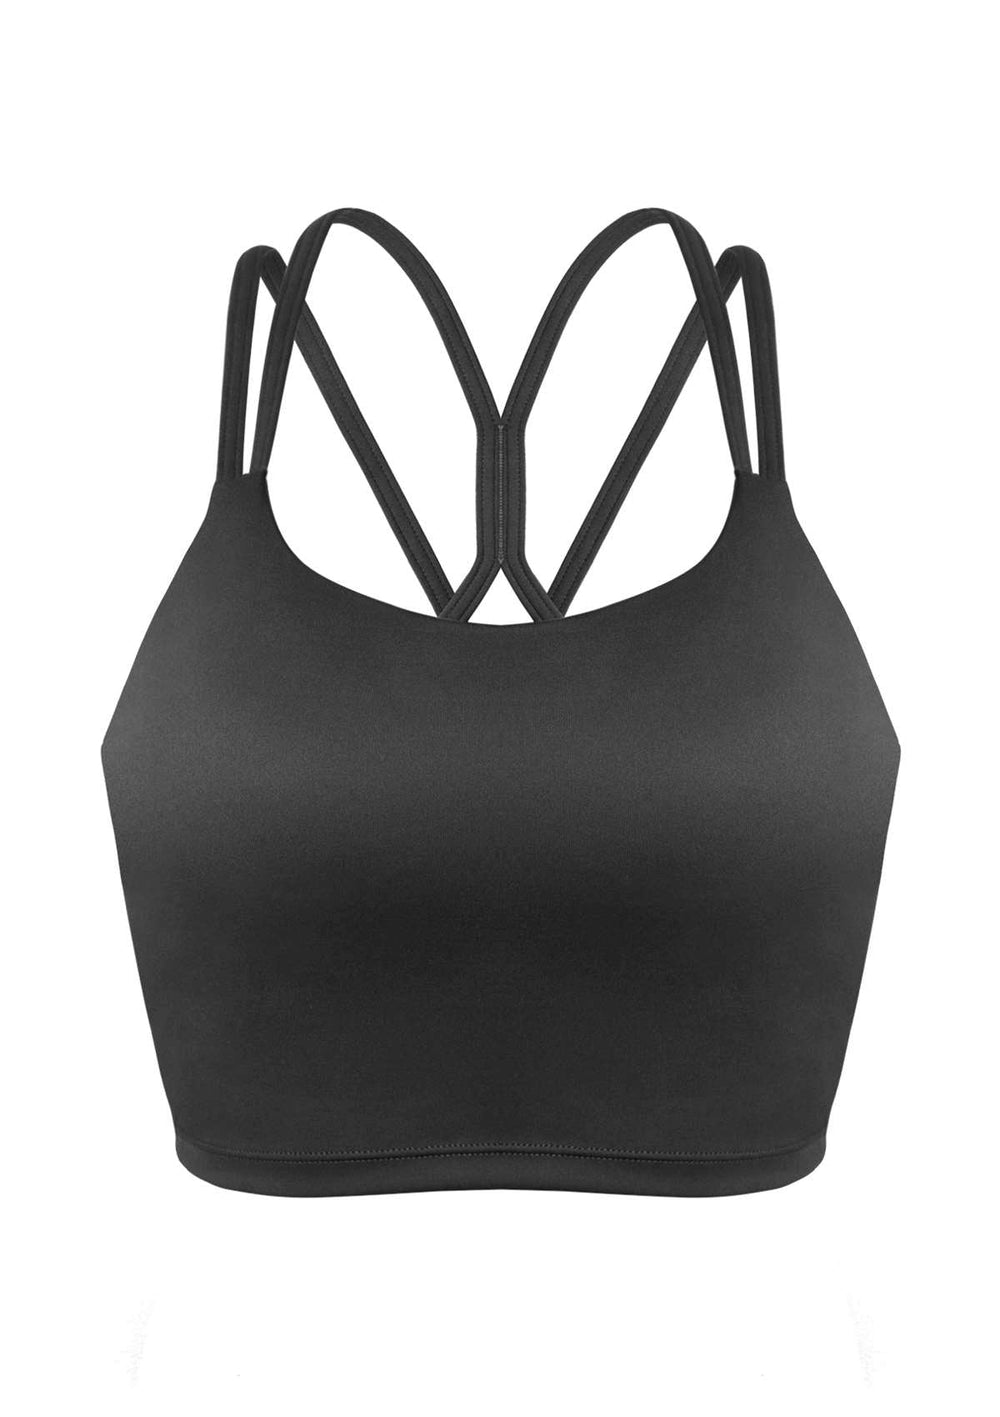 ANESHA High Impact Sports Bras for Women High Support Large Bust Women’s  Sports Bras Strappy Padded Sports Bra Crisscross Back Free Size (26 – 28)